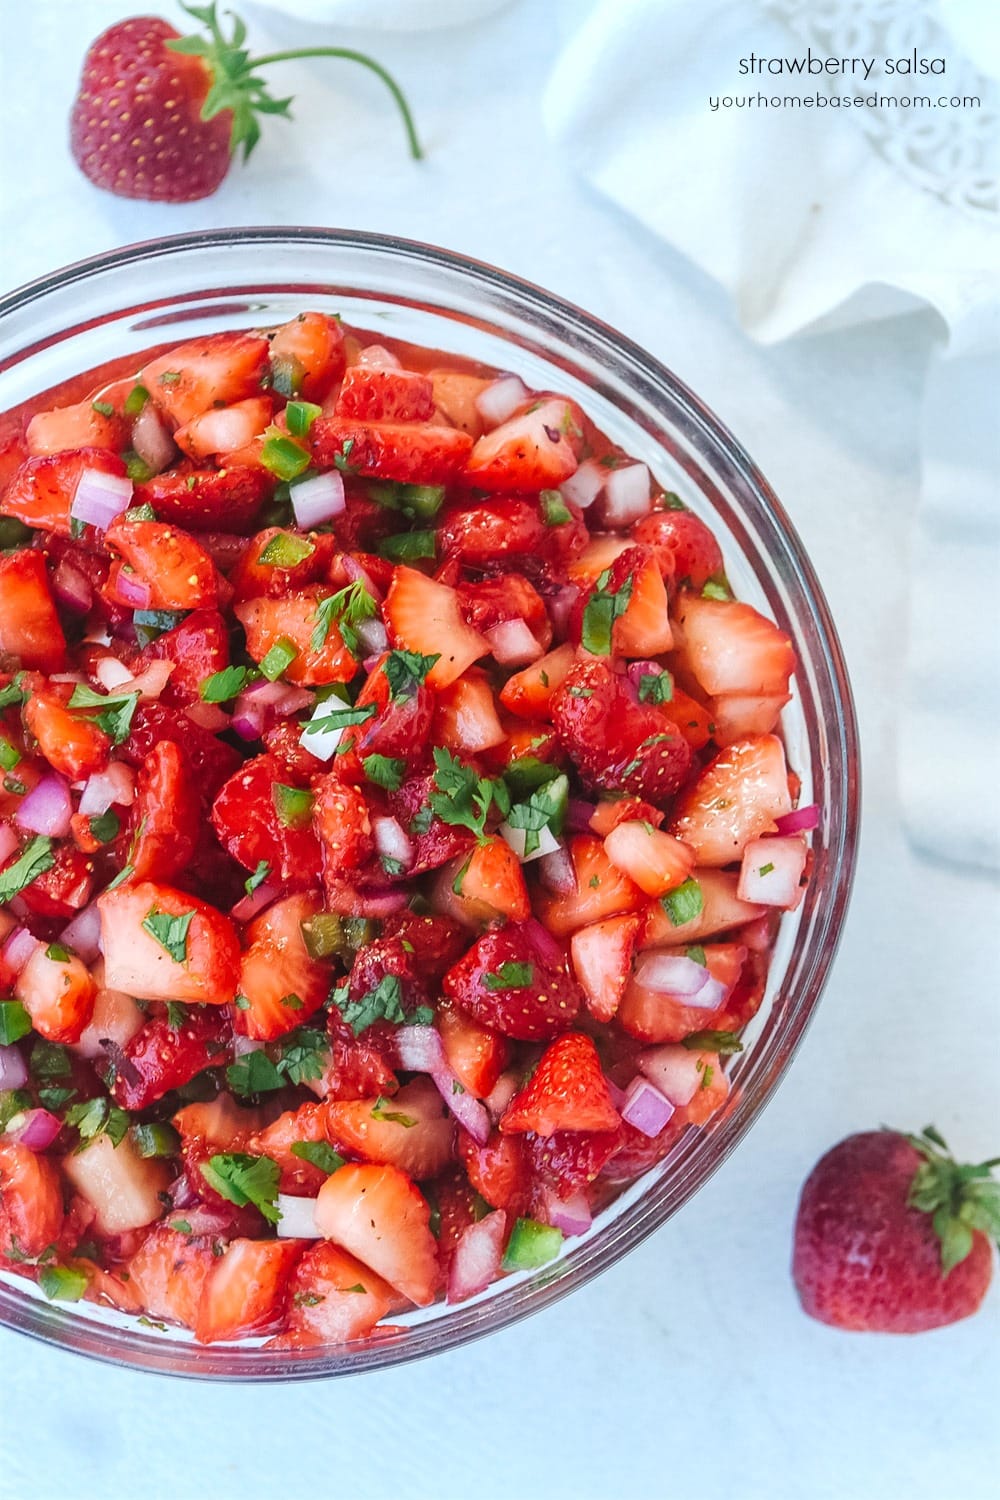 Strawberry salsa in a bowl